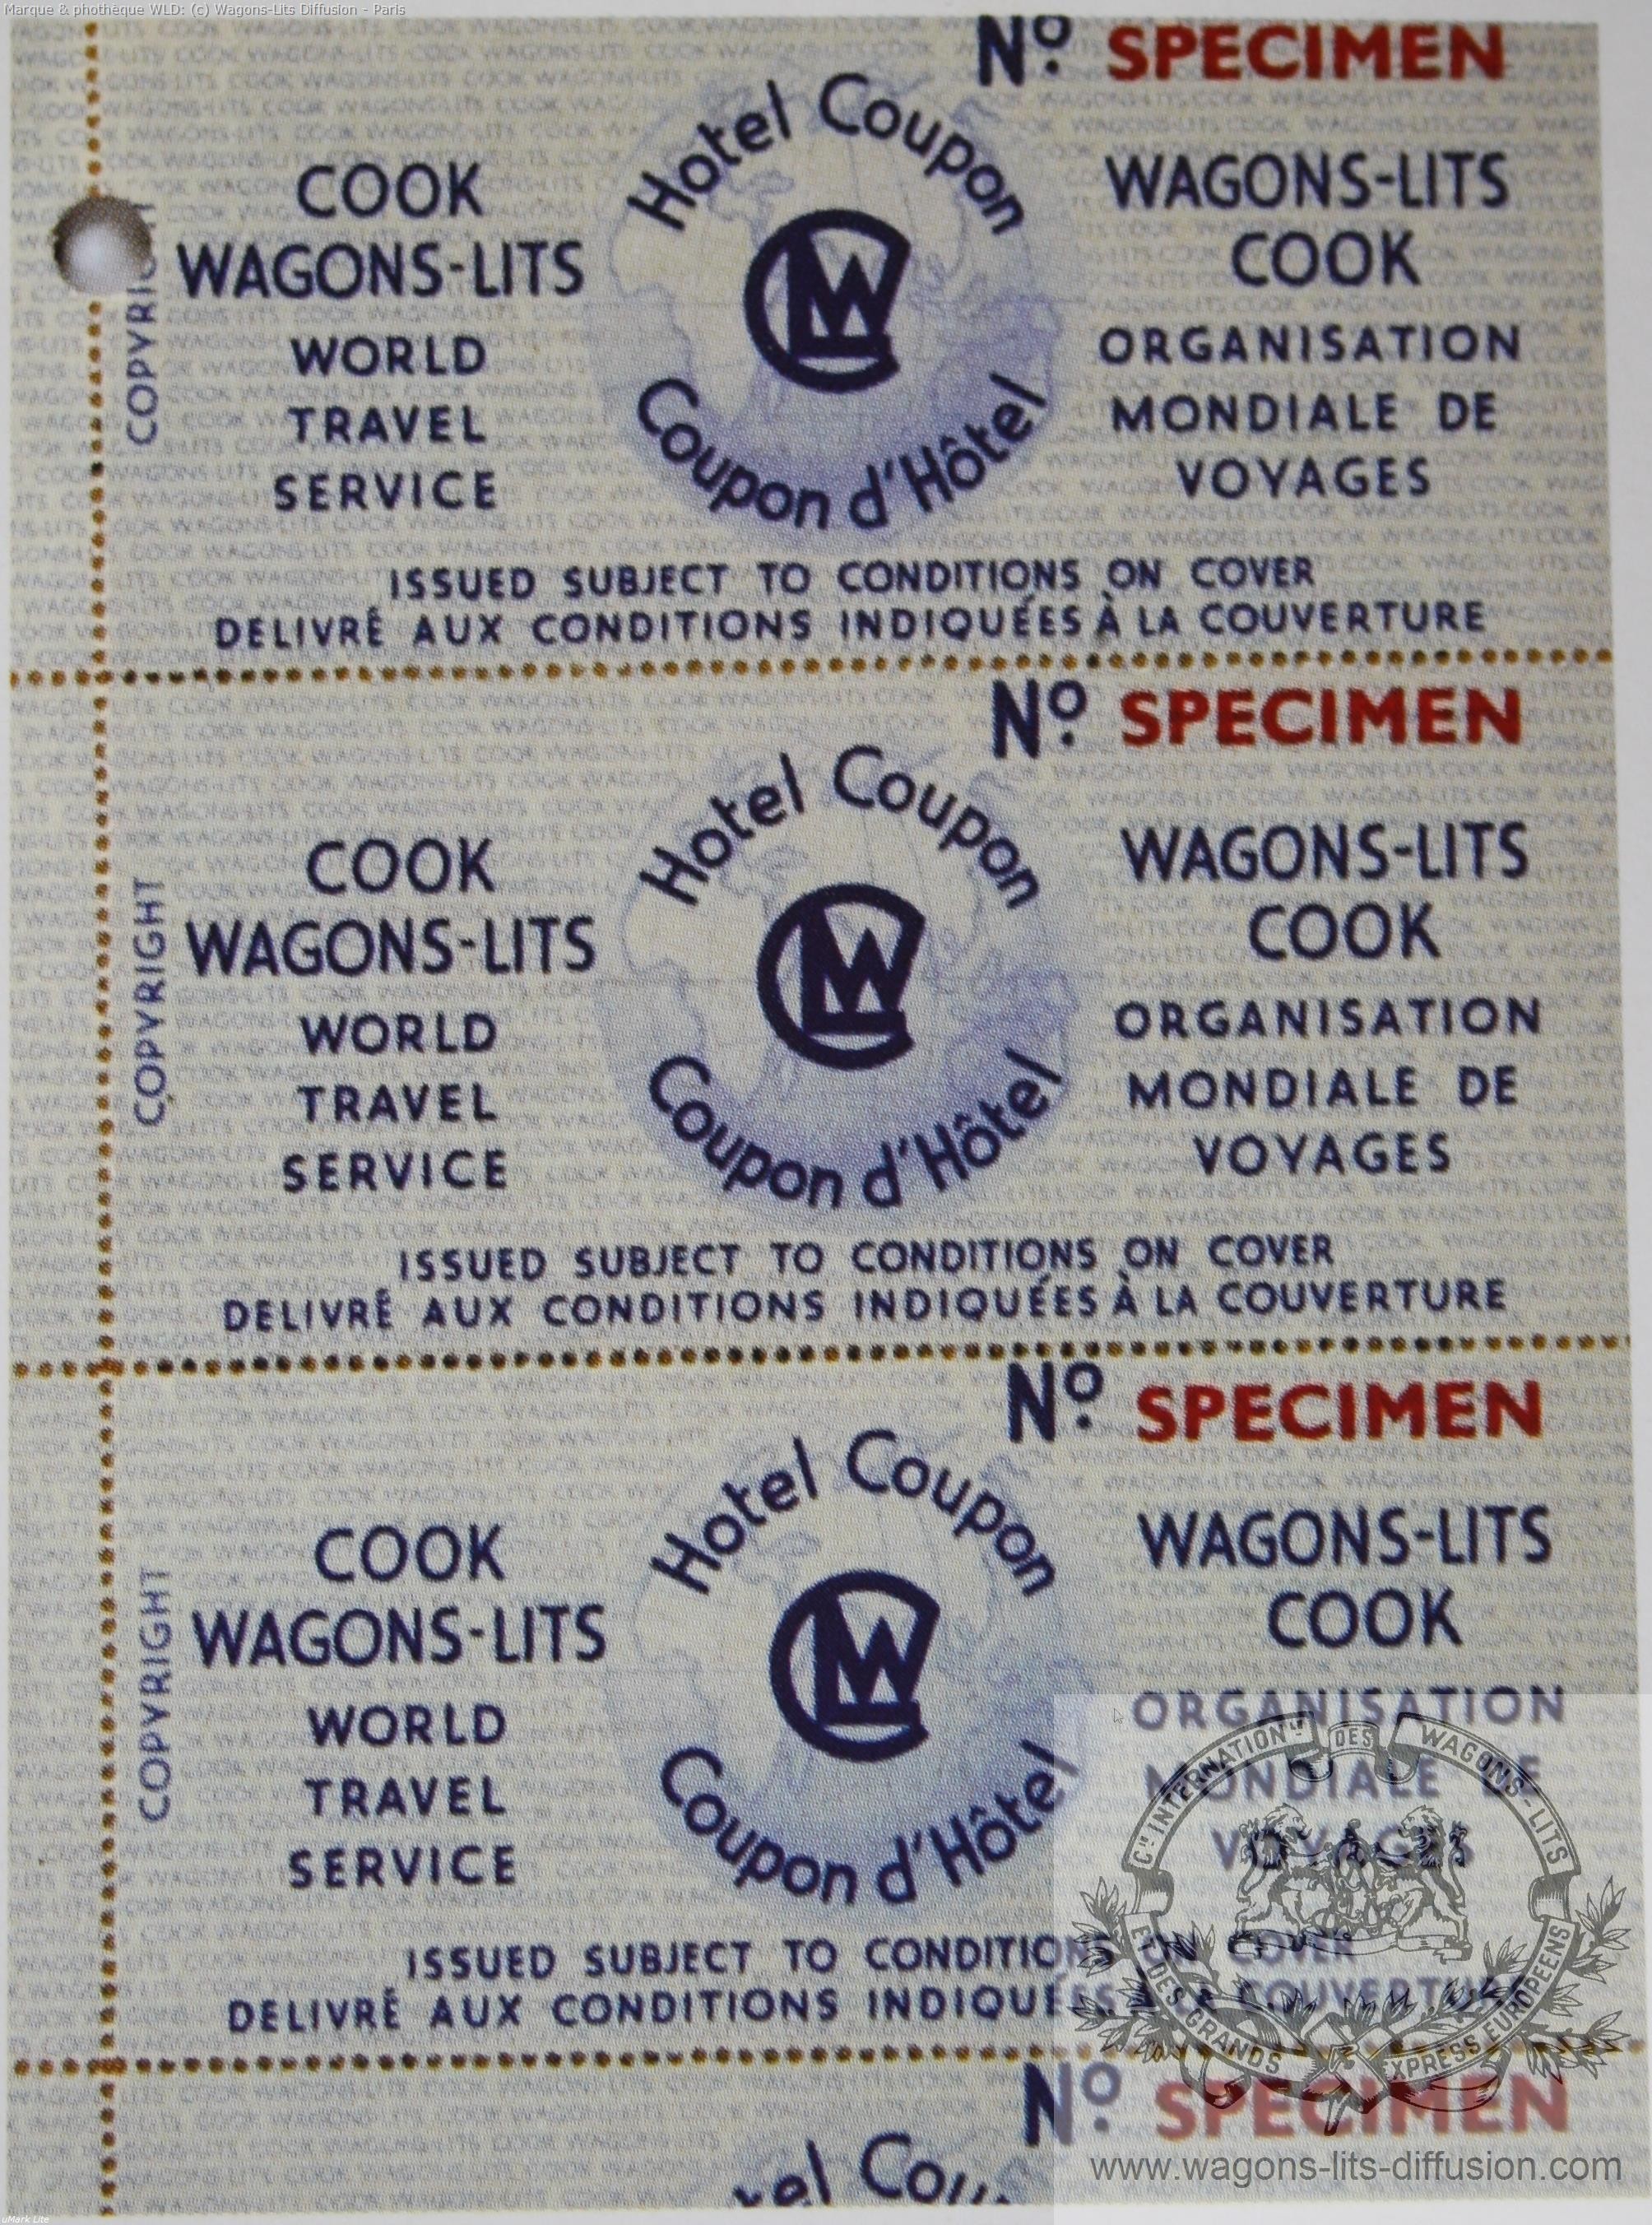 Wl cook coupon reservation hotels 1936